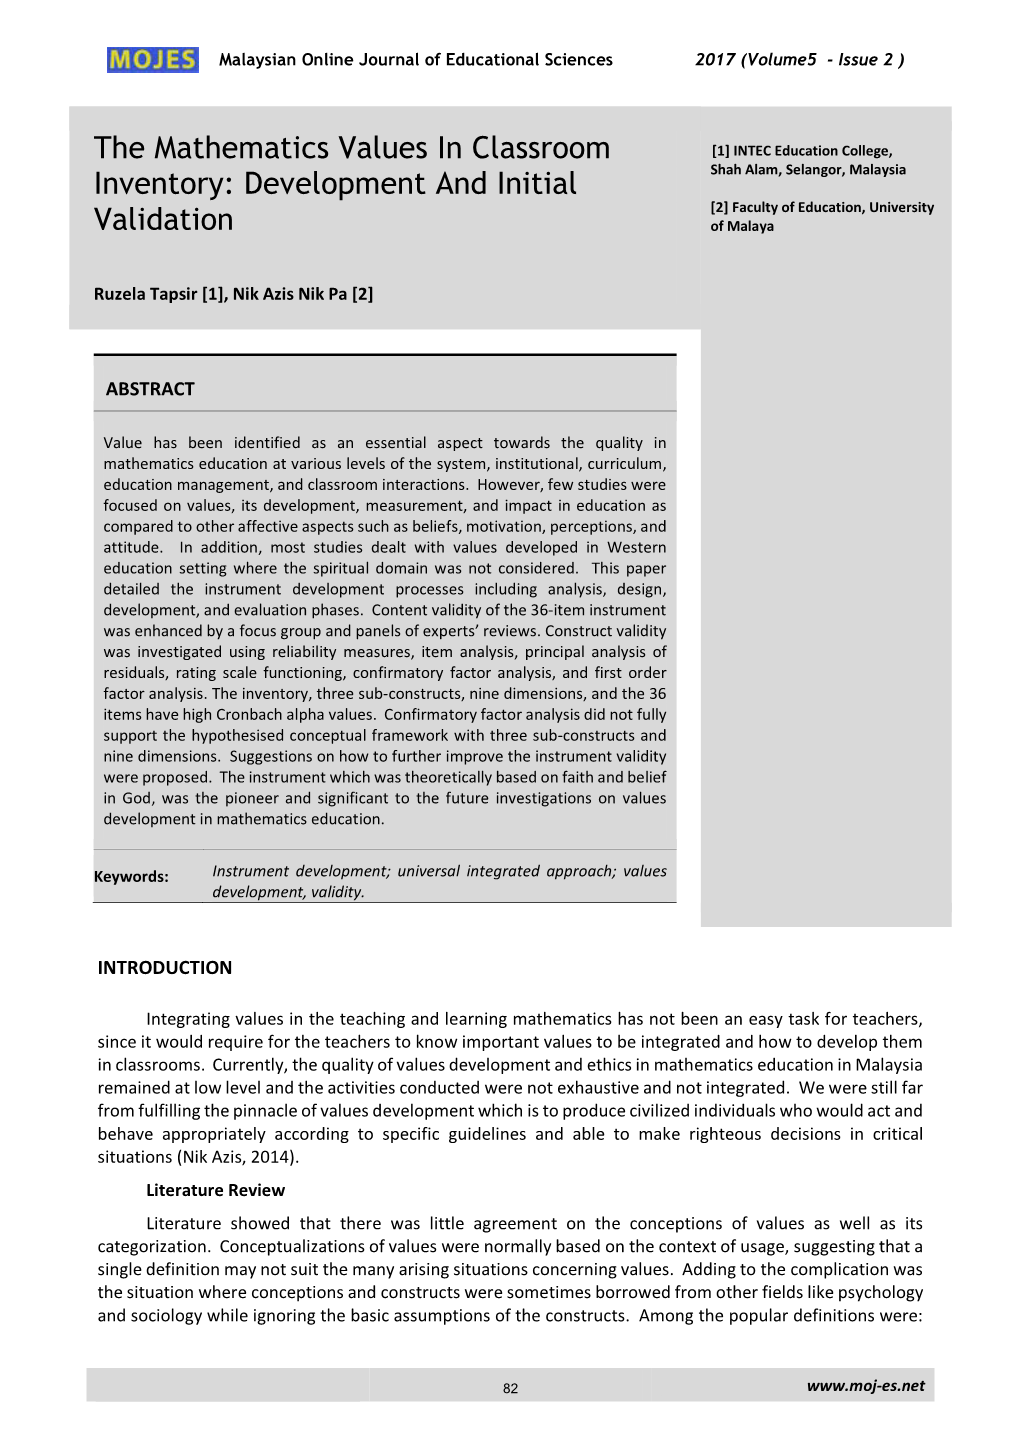 The Mathematics Values in Classroom Inventory: Development and Initial